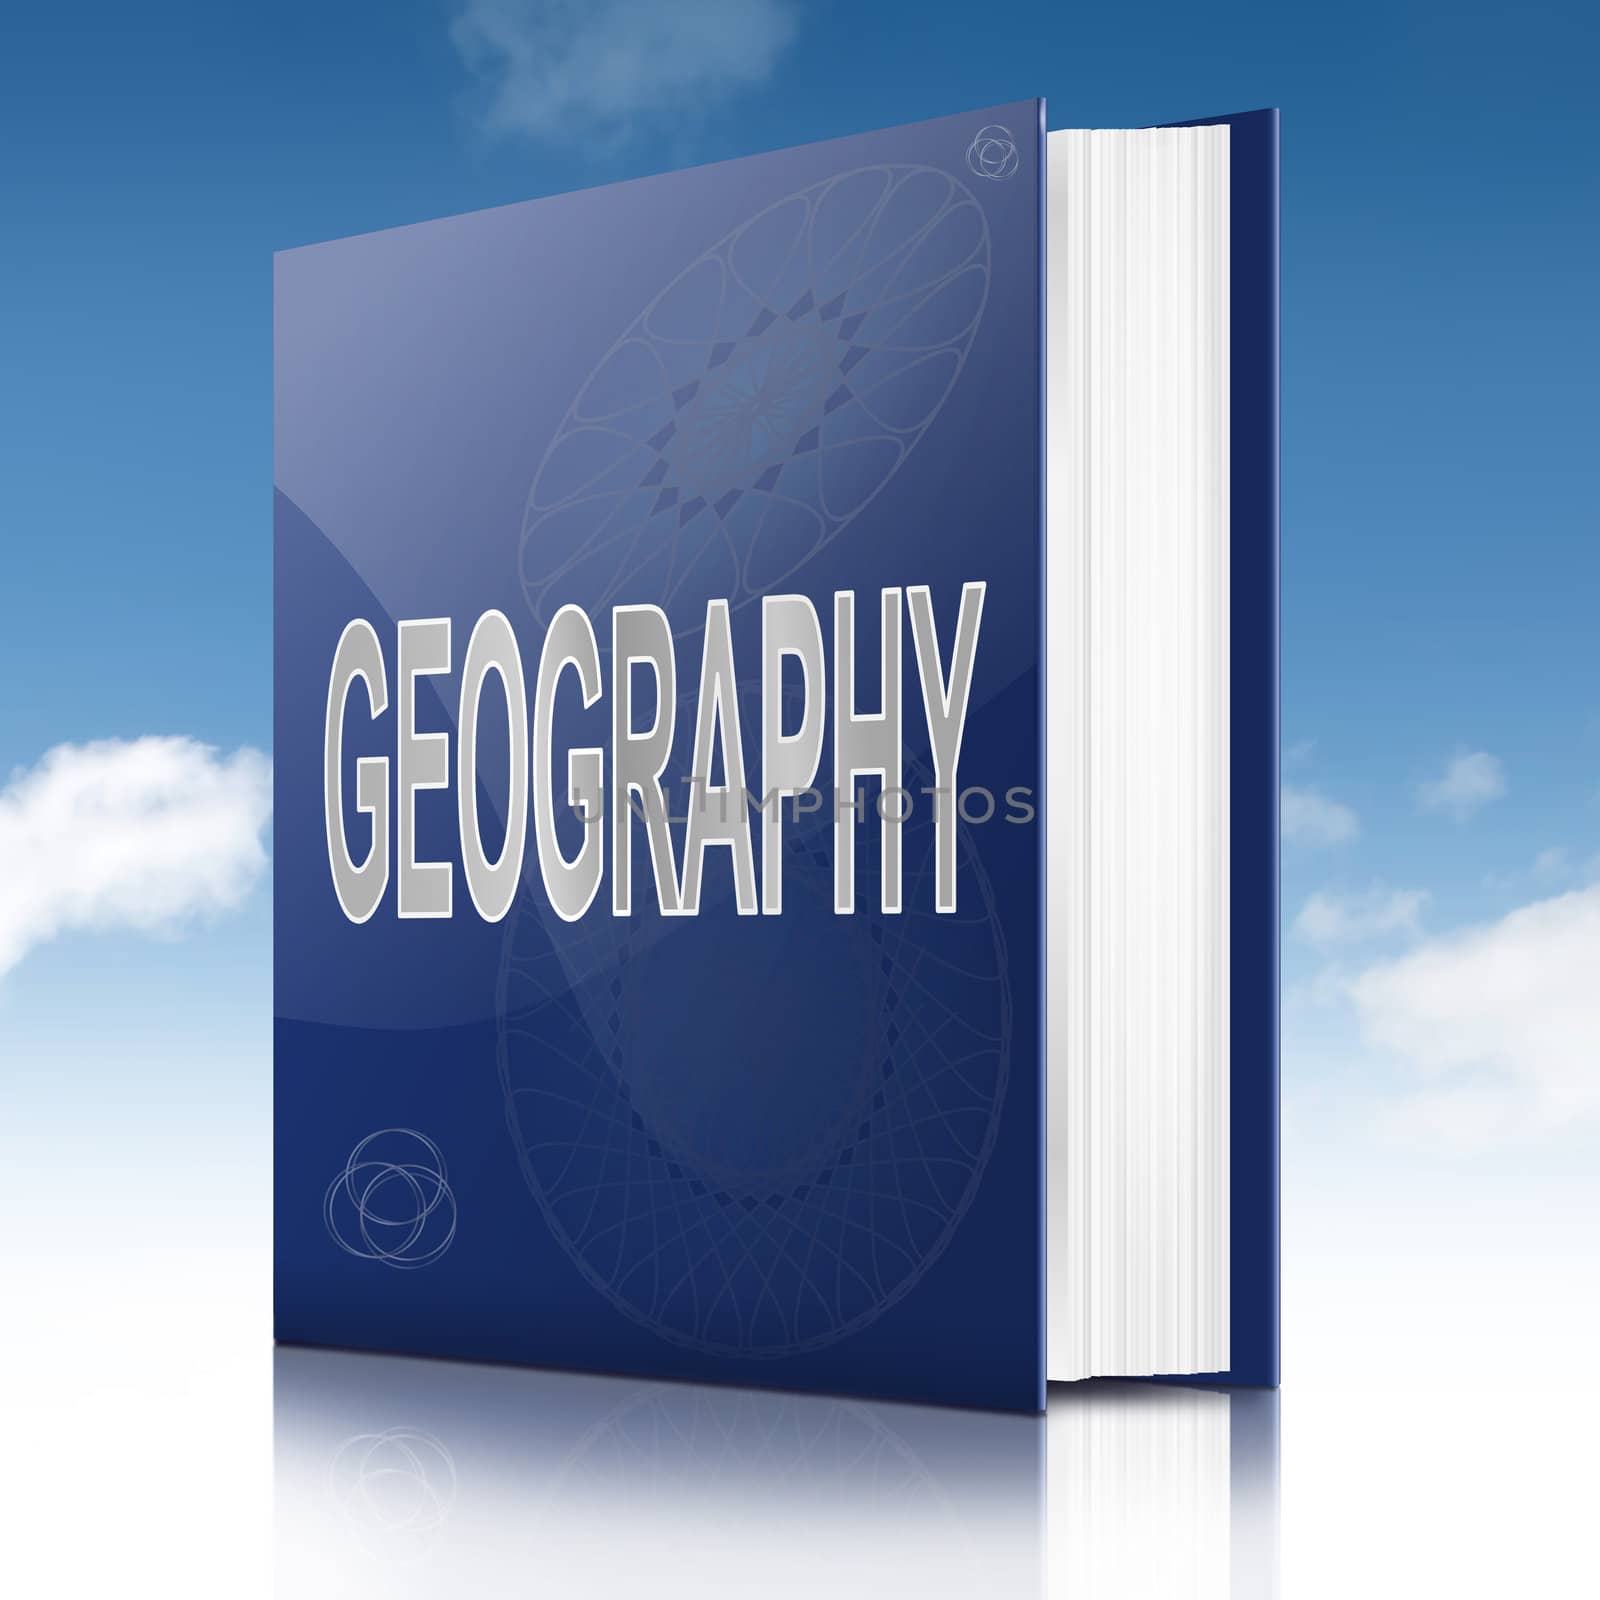 Geography text book. by 72soul